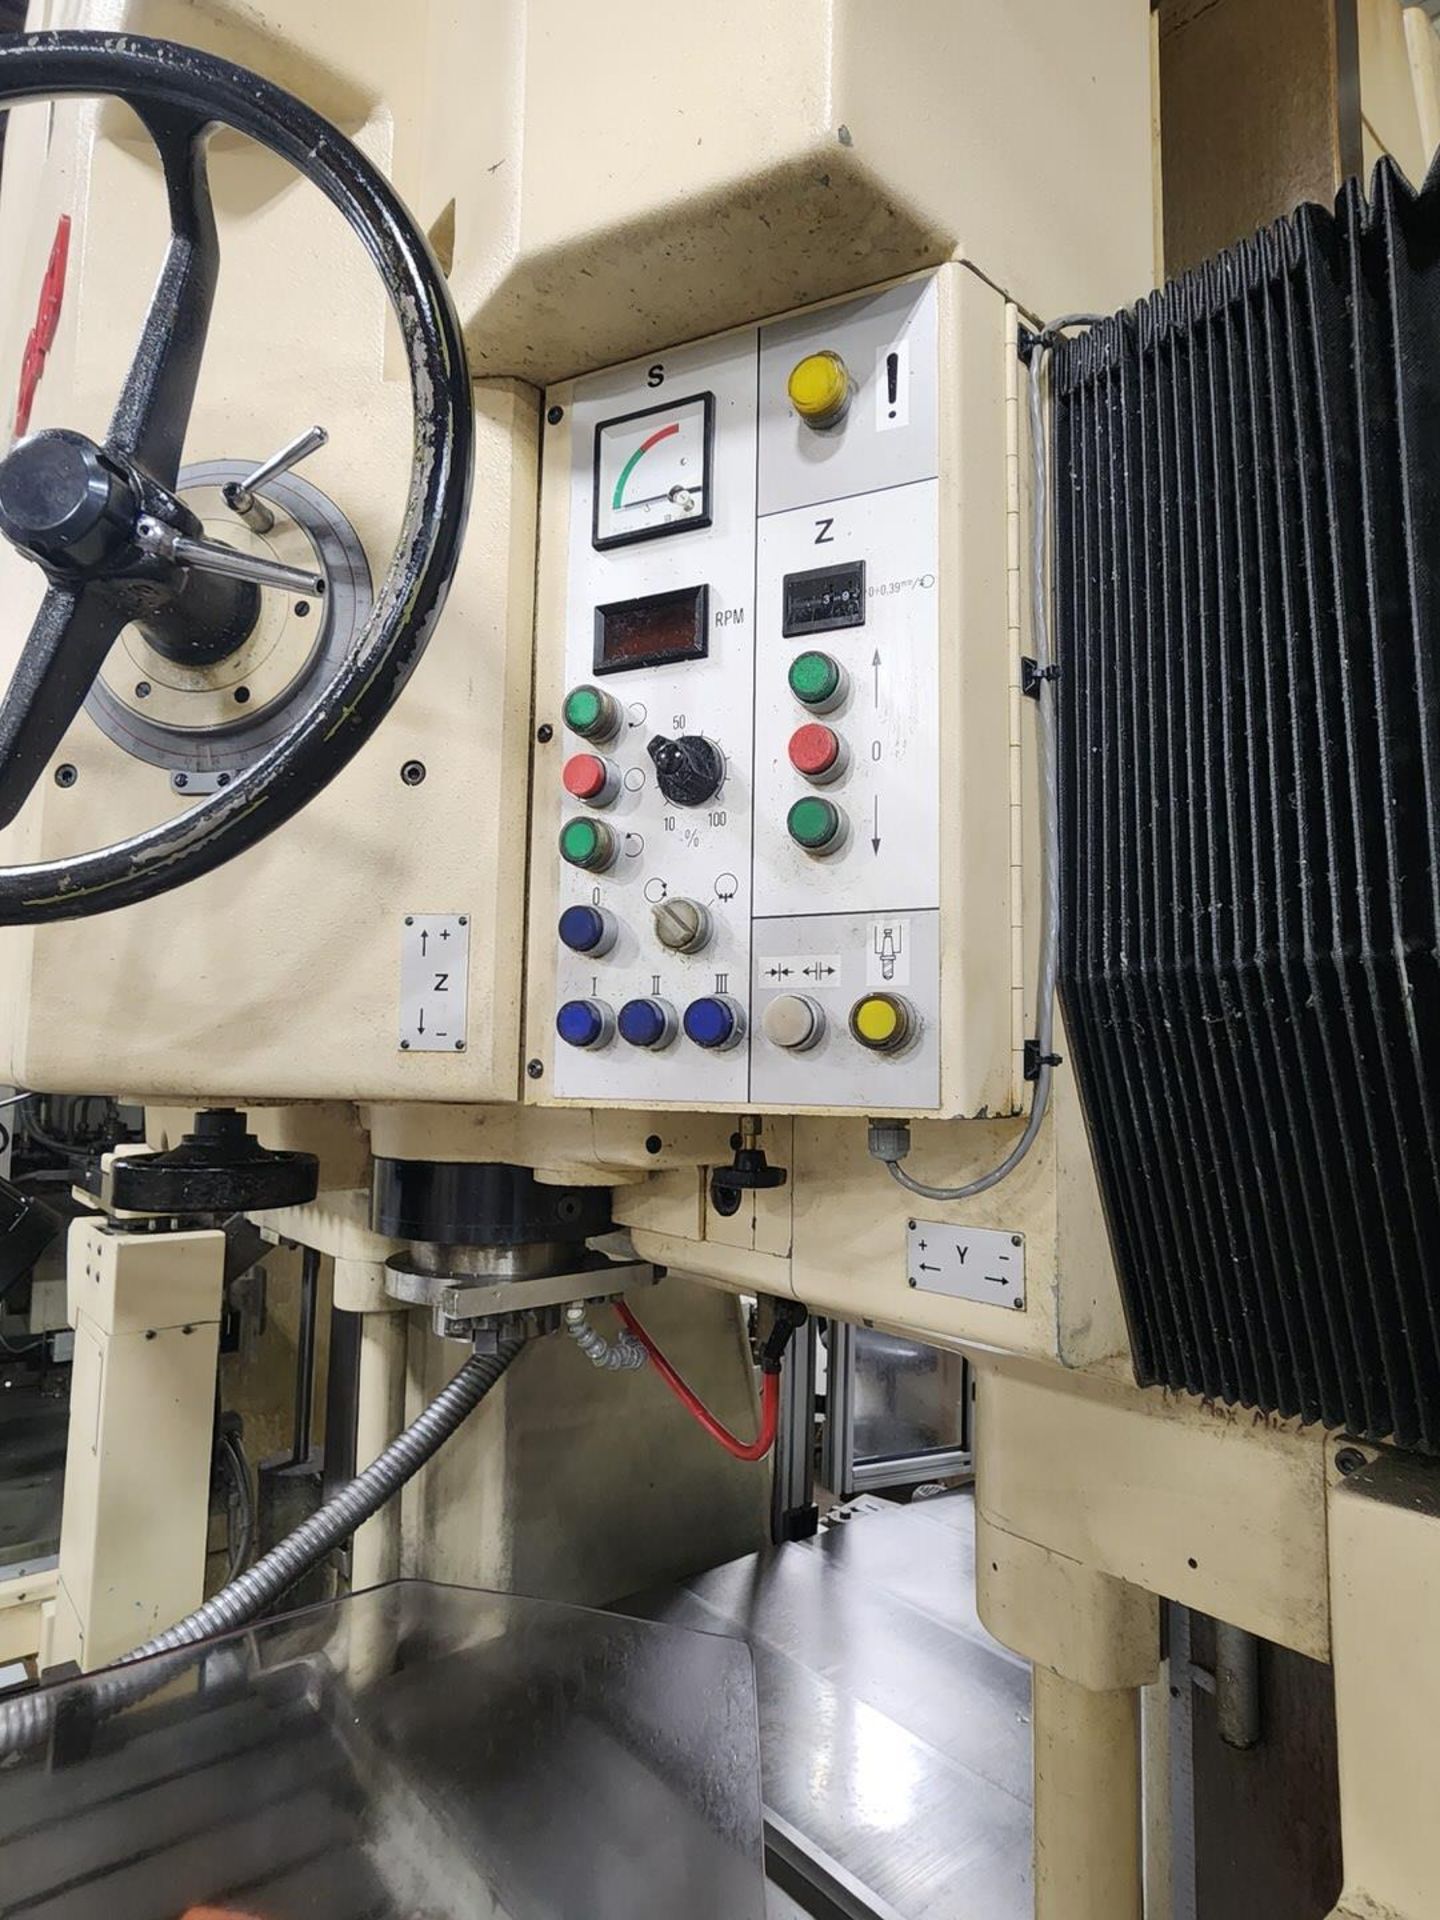 SIP SIP-640 Jig Boring Machine W/ Fanuc Series 16i-M Controller; Cutting Time: 15,304hrs - Image 14 of 36